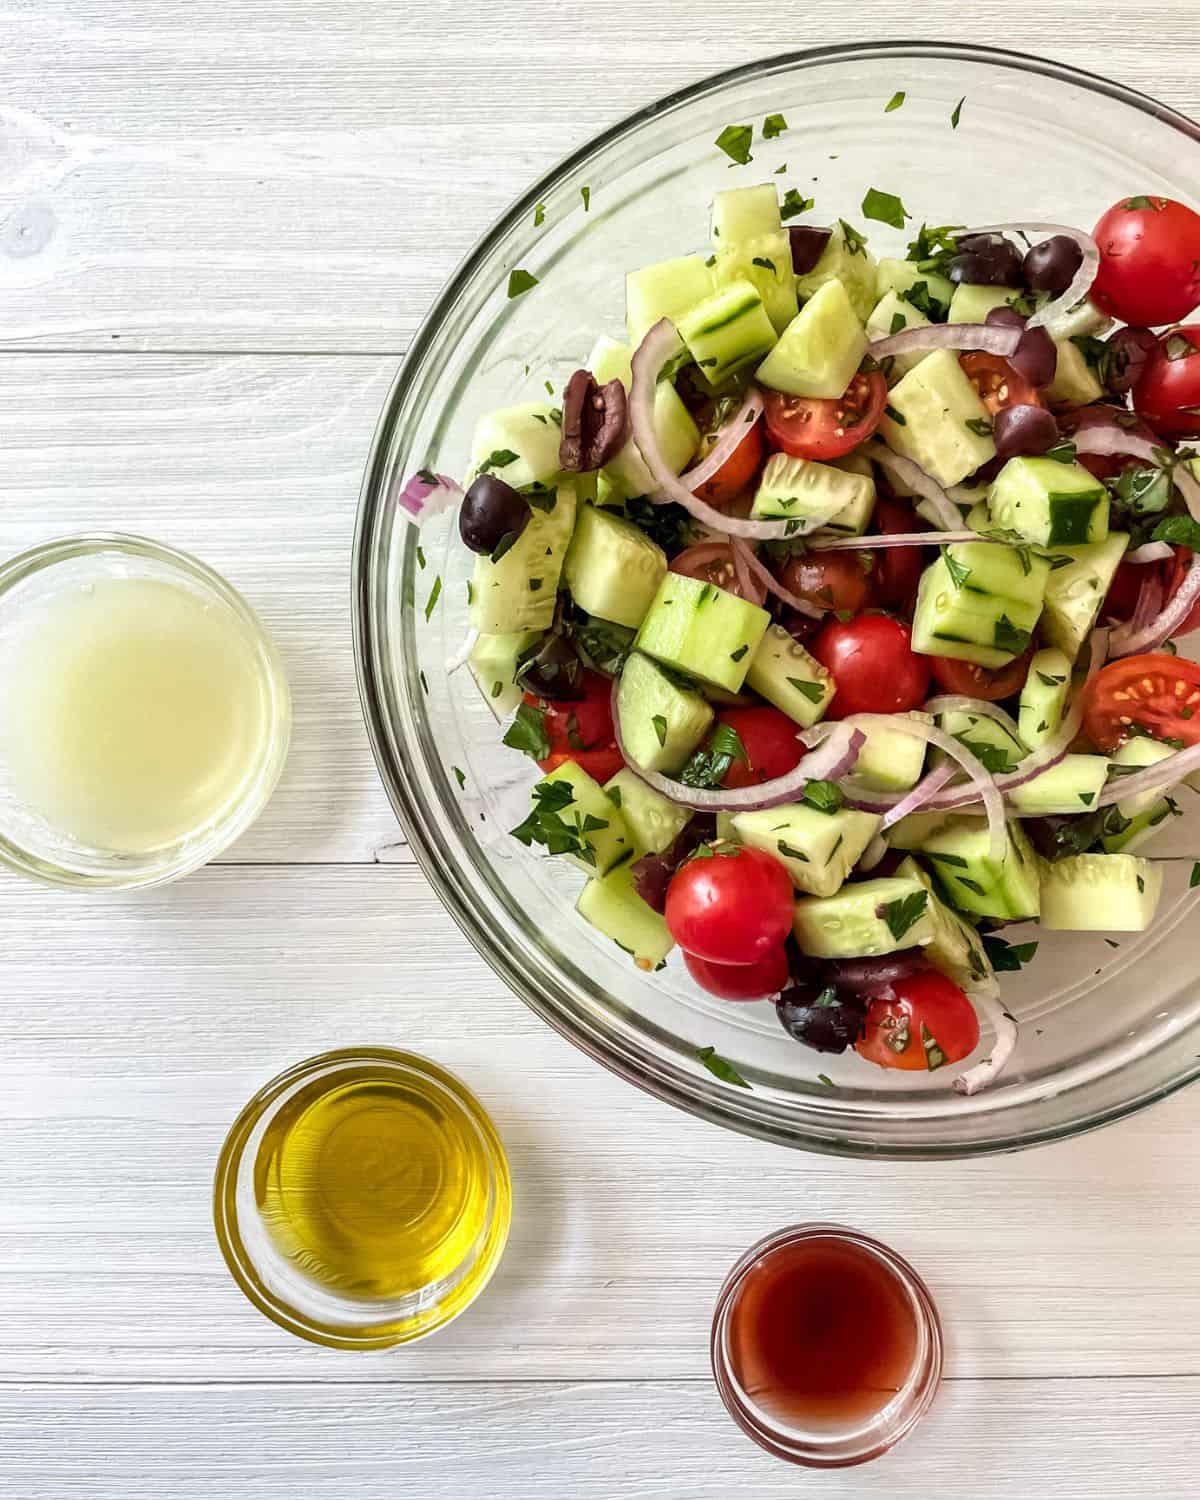 All dry tomato cucumber salad ingredients are in a glass bowl, with three small glass bowls next to it, containing fresh lemon juice, red wine vinegar and olive oil.